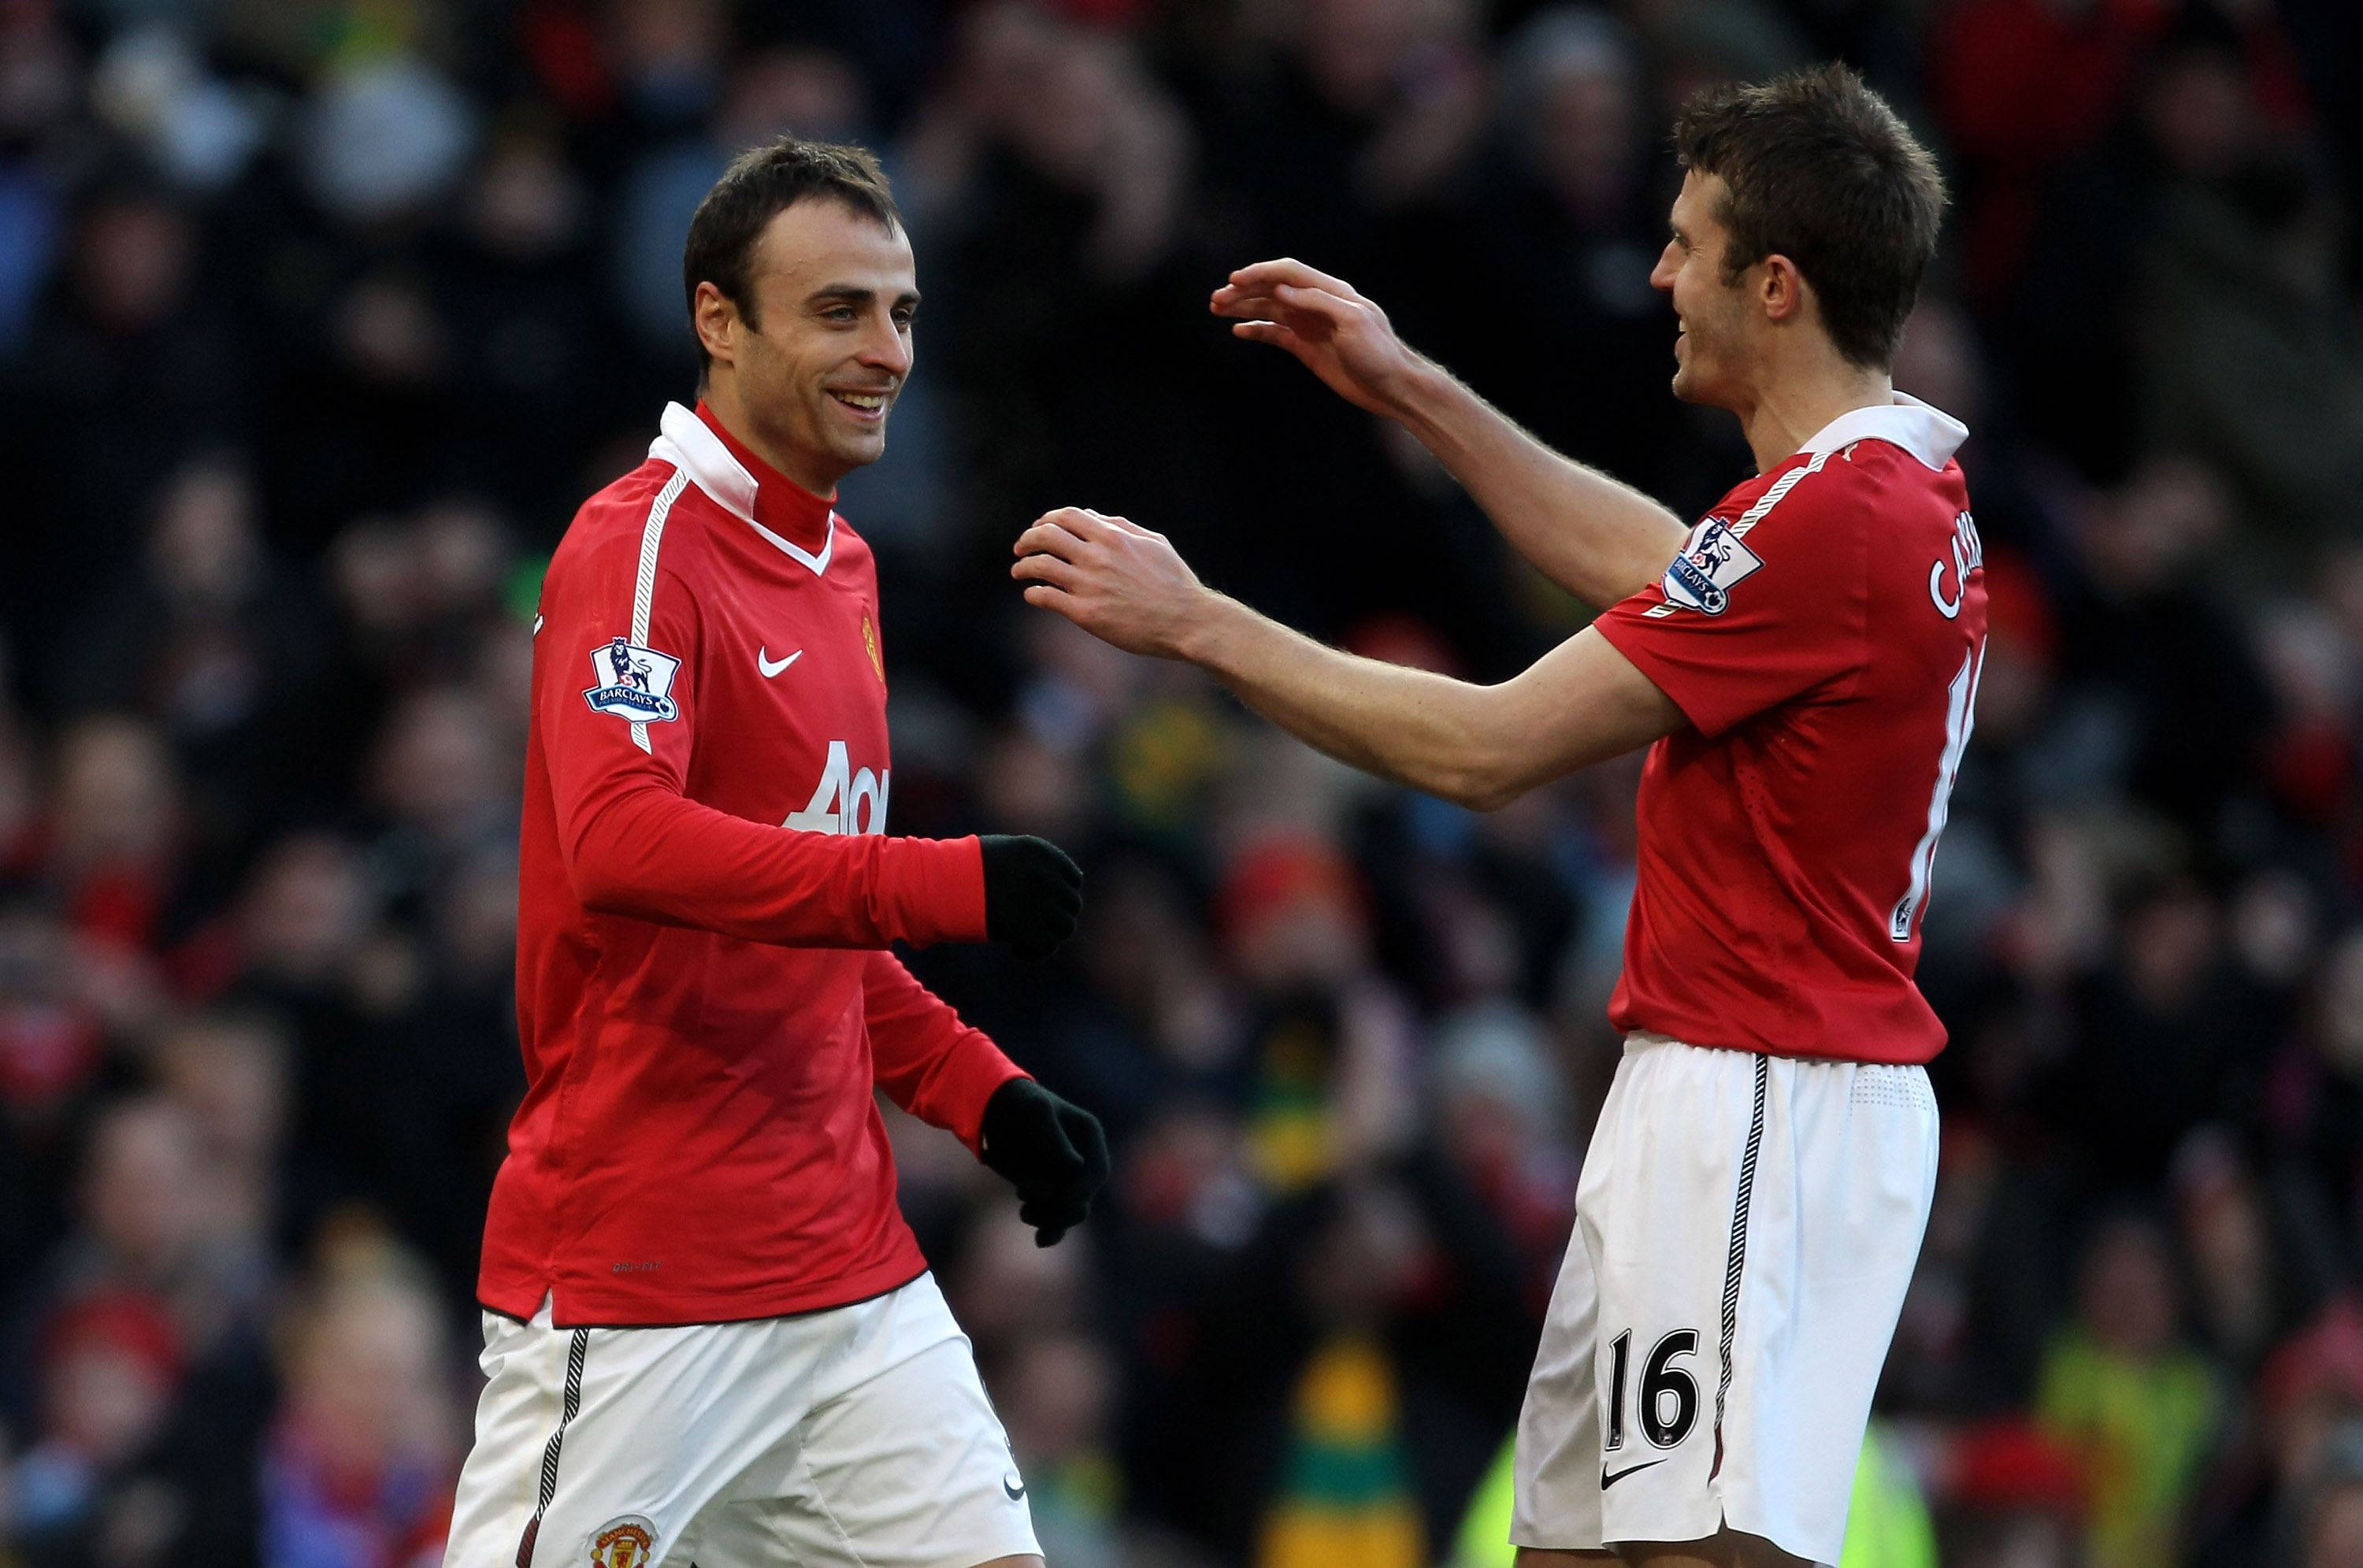 MANCHESTER, ENGLAND - NOVEMBER 27:  Dimitar Berbatov (L) of Manchester United is congratulated by team mate Michael Carrick after scoring the opening goal during the Barclays Premier League match between Manchester United and Blackburn Rovers at Old Traff